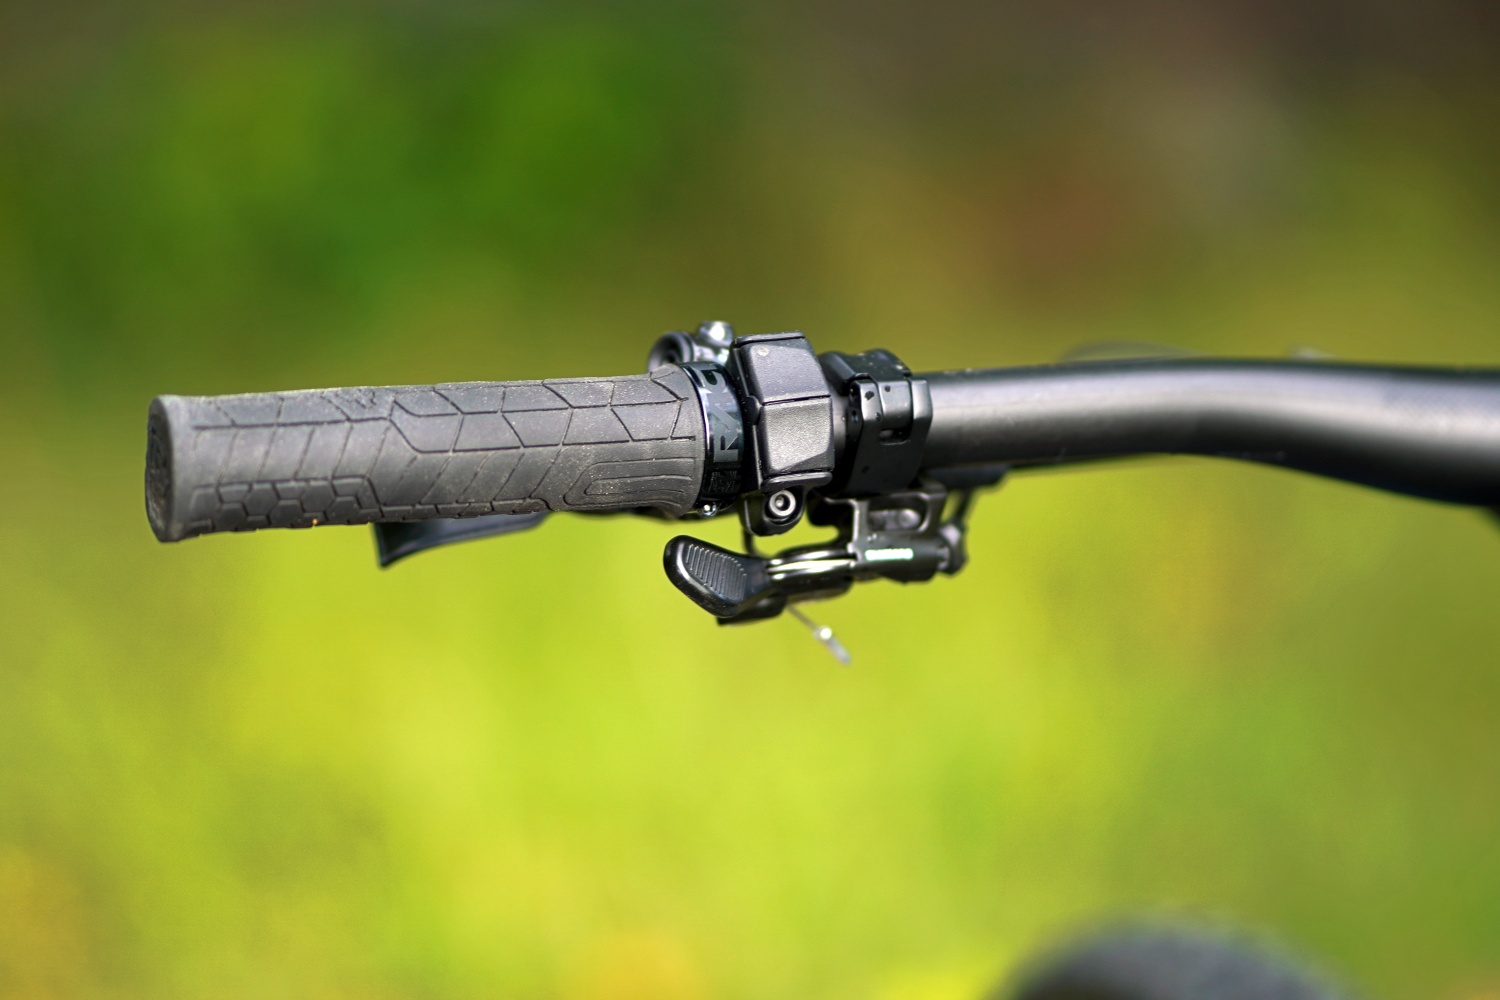 It's easy operating the walk assist with the Shimano handlebar remote.